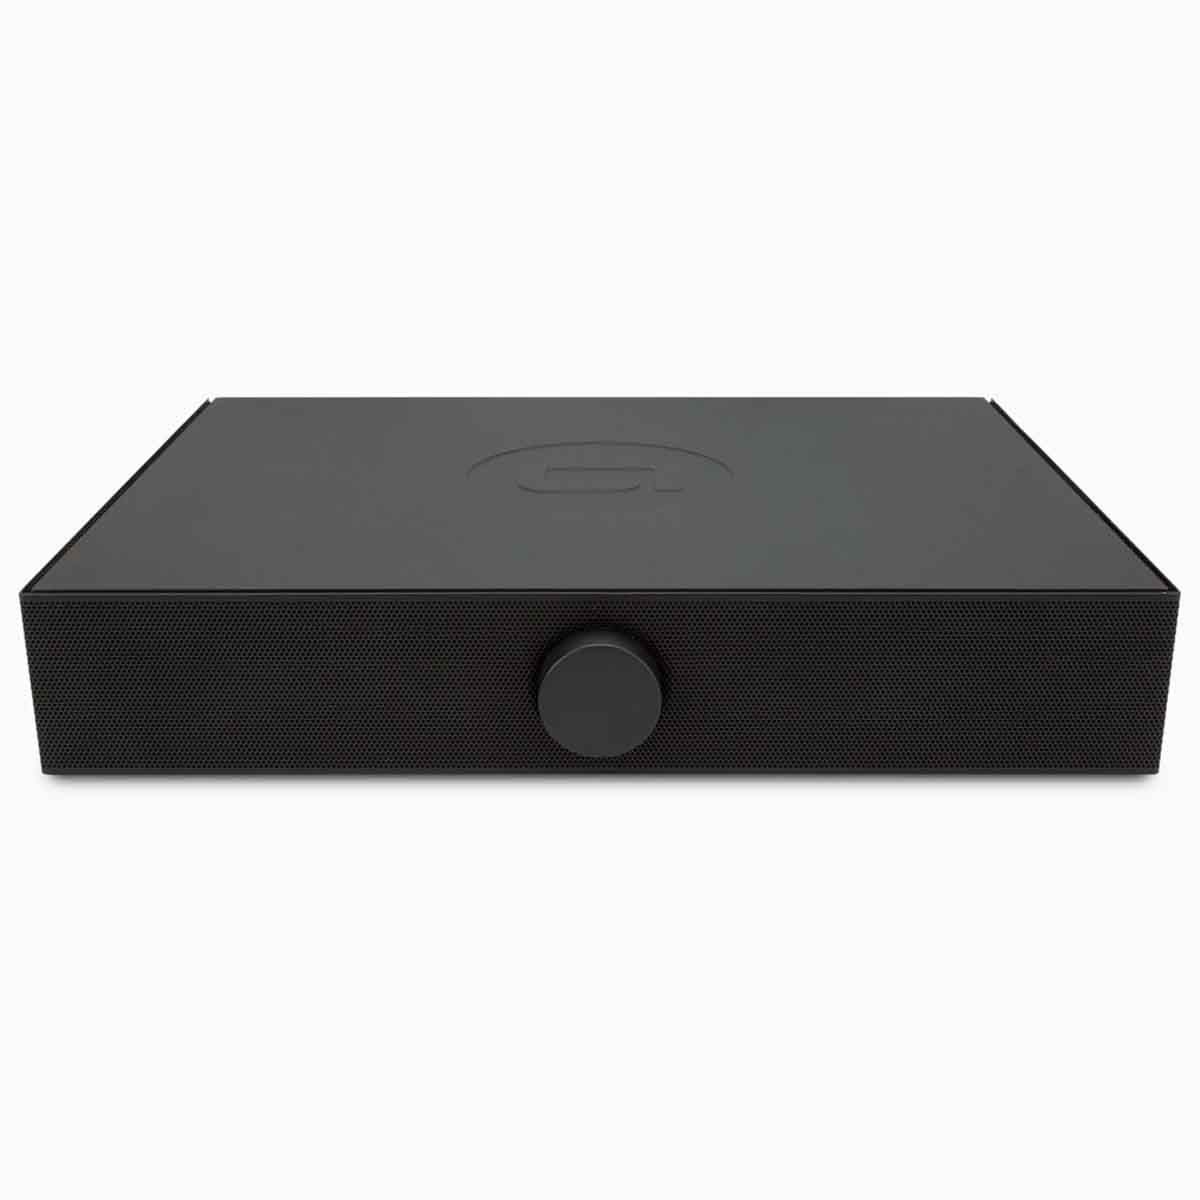 Andover Audio Spinbase Turntable Speaker System Black- front view